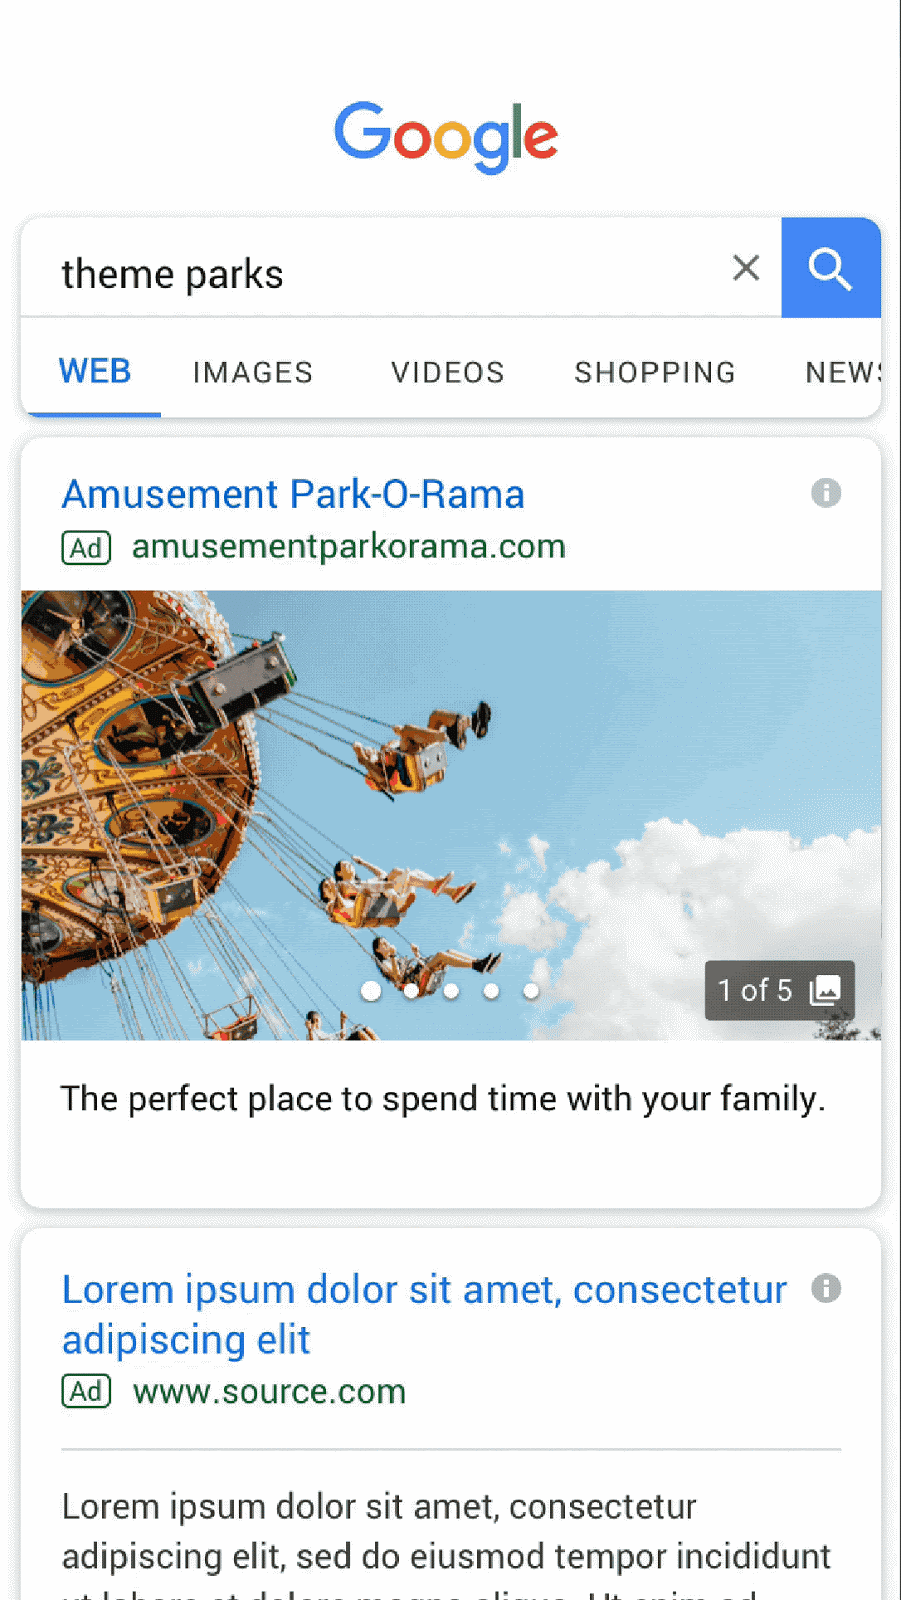 A Gallery Ad showing multiple pictures of a theme park one after another.